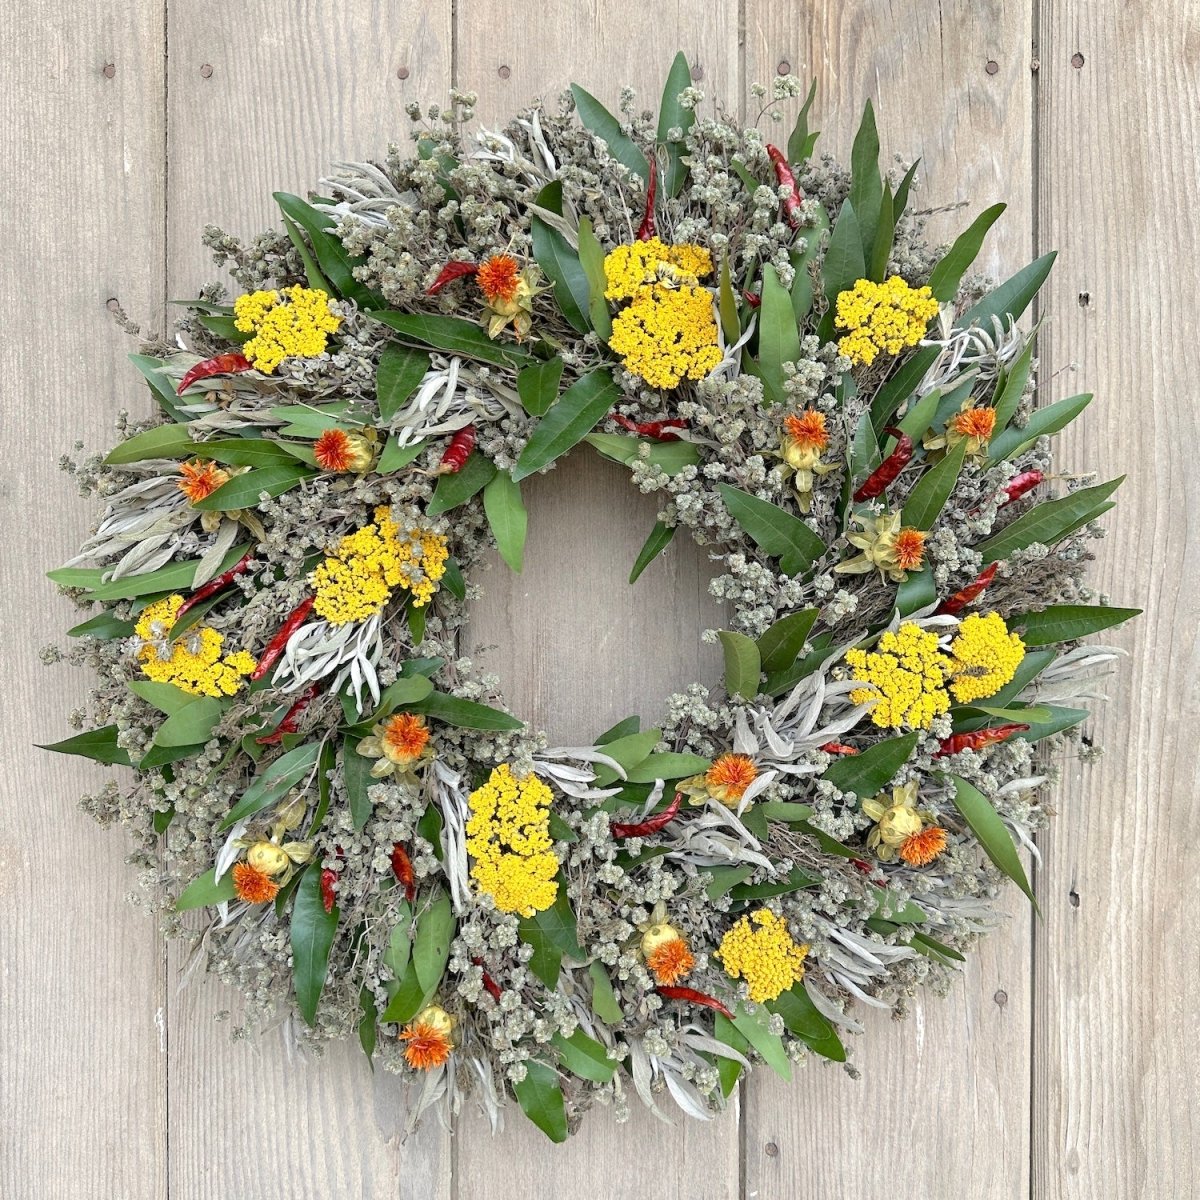 Welcome Spring Wreath Class